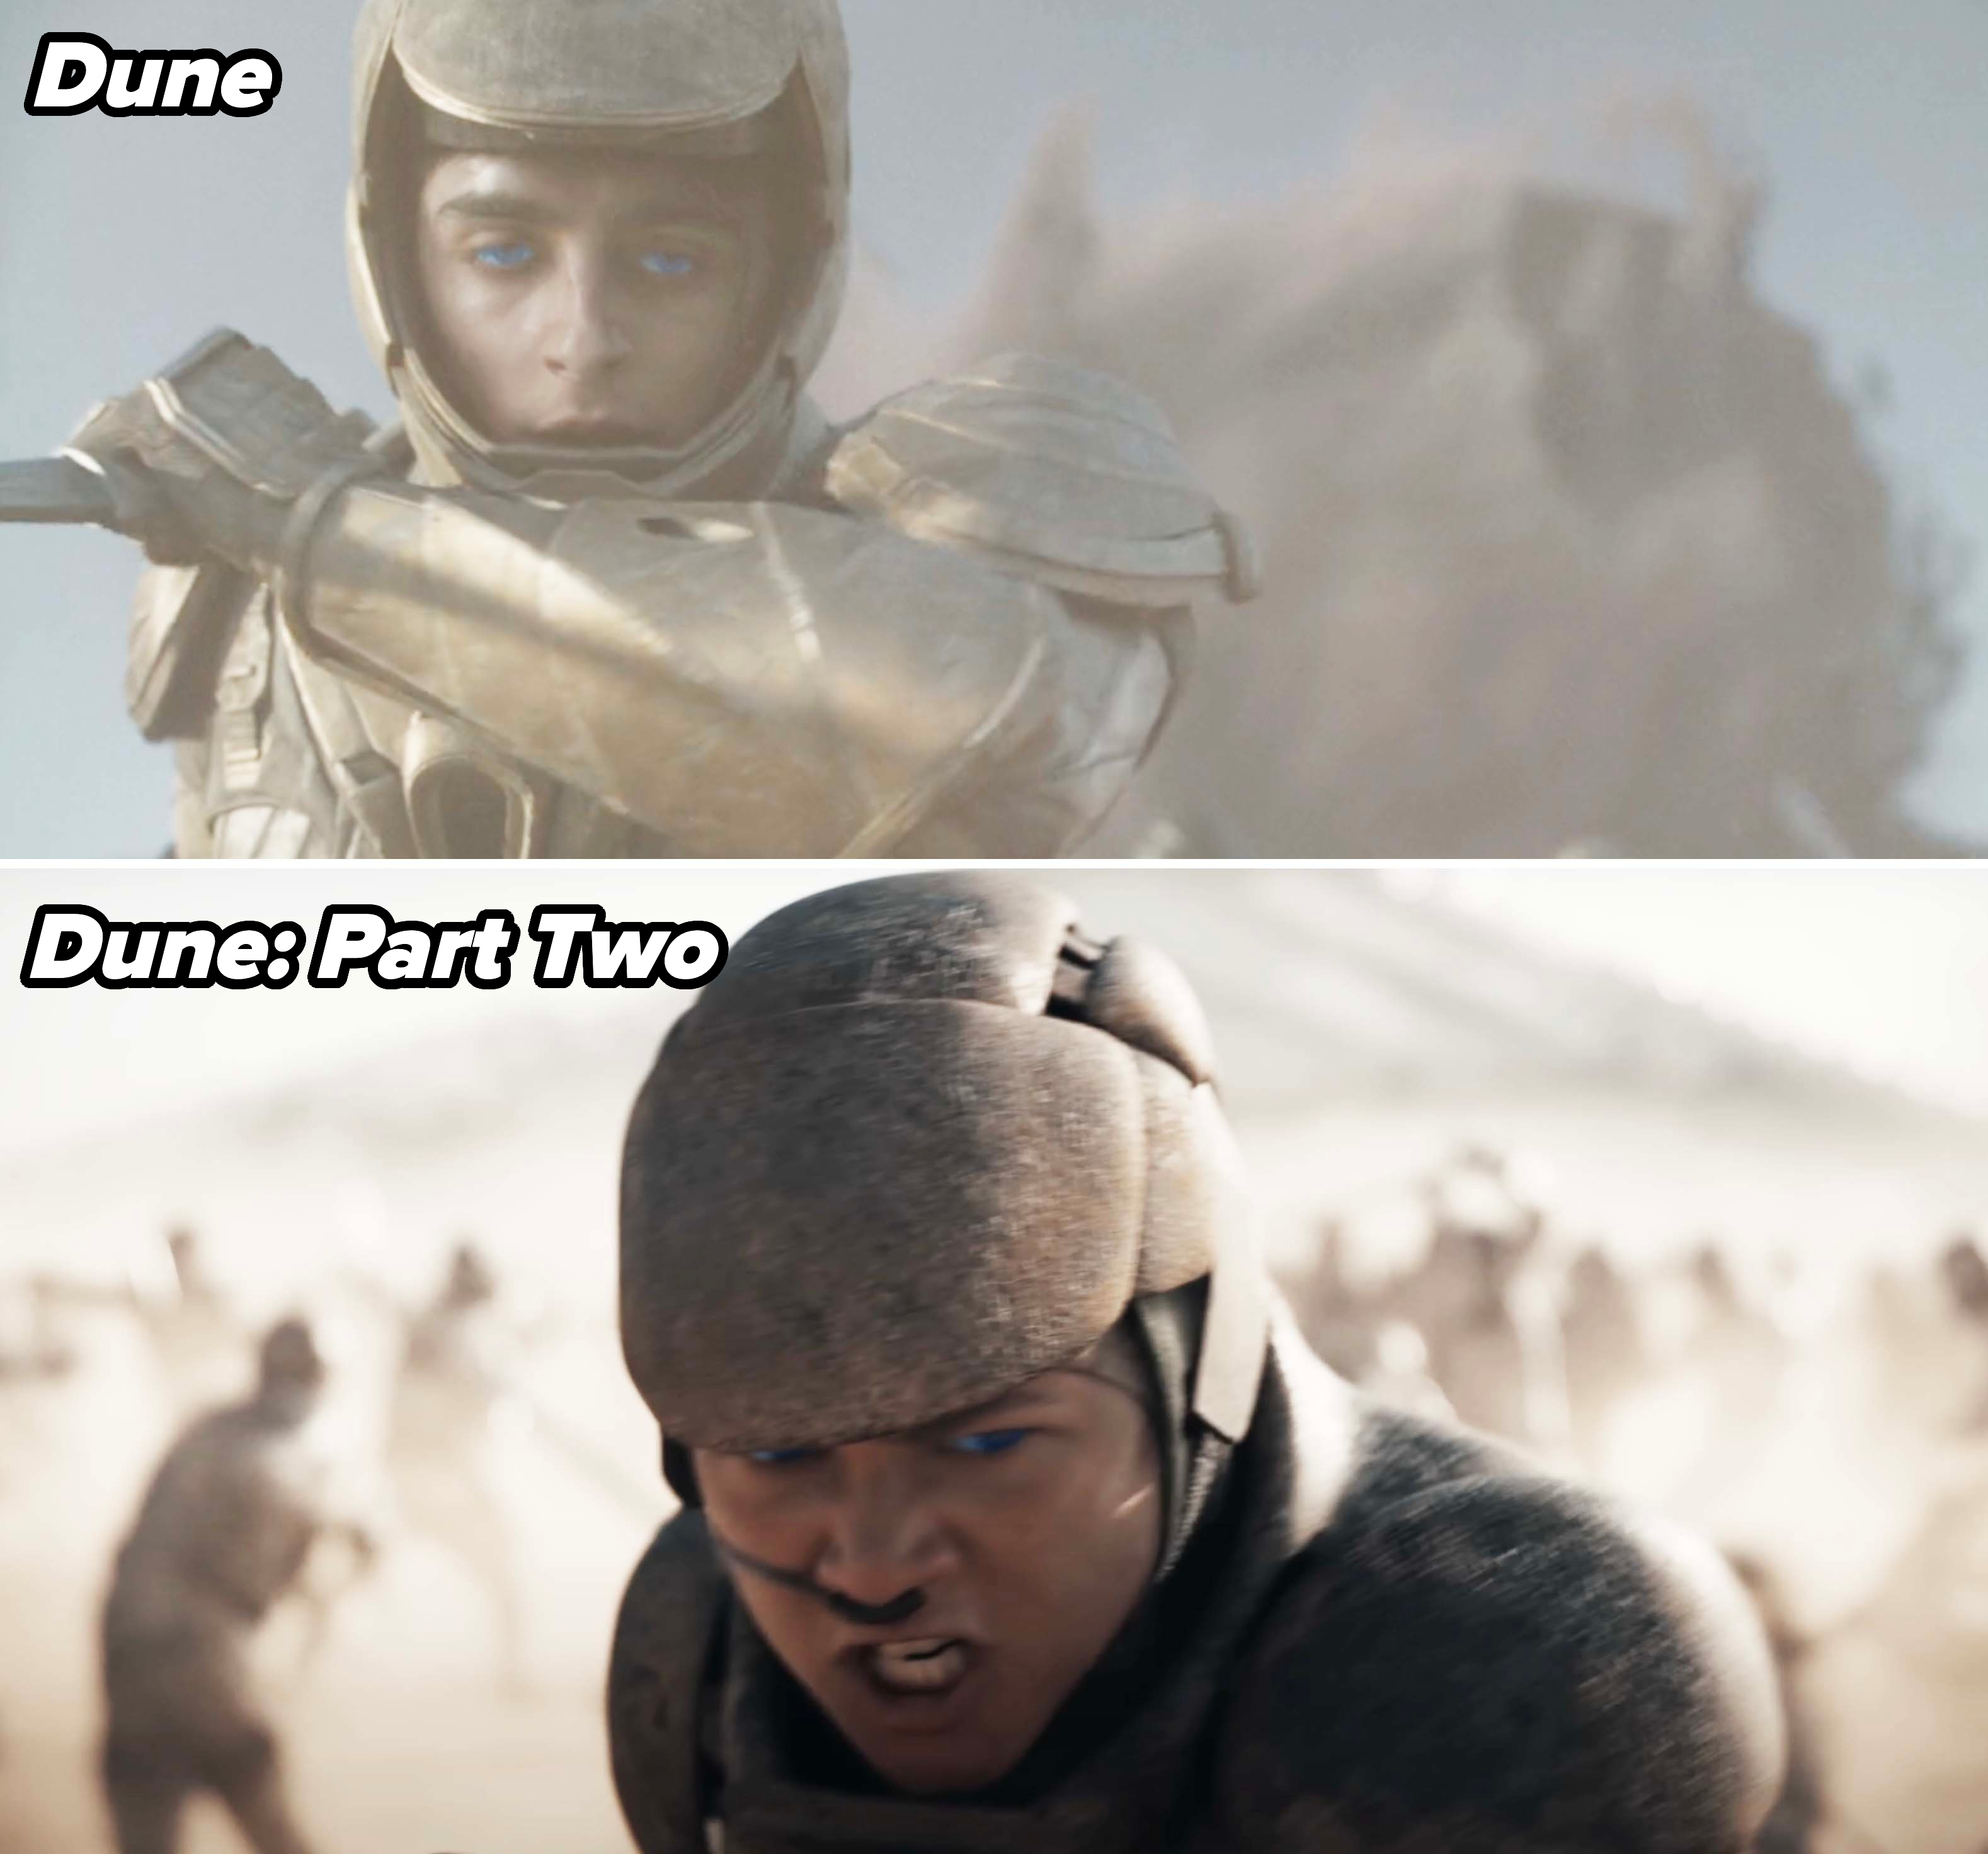 Paul fighting in Dune vs Chani fighting in a similar manor and in a similar outfit in Dune 2